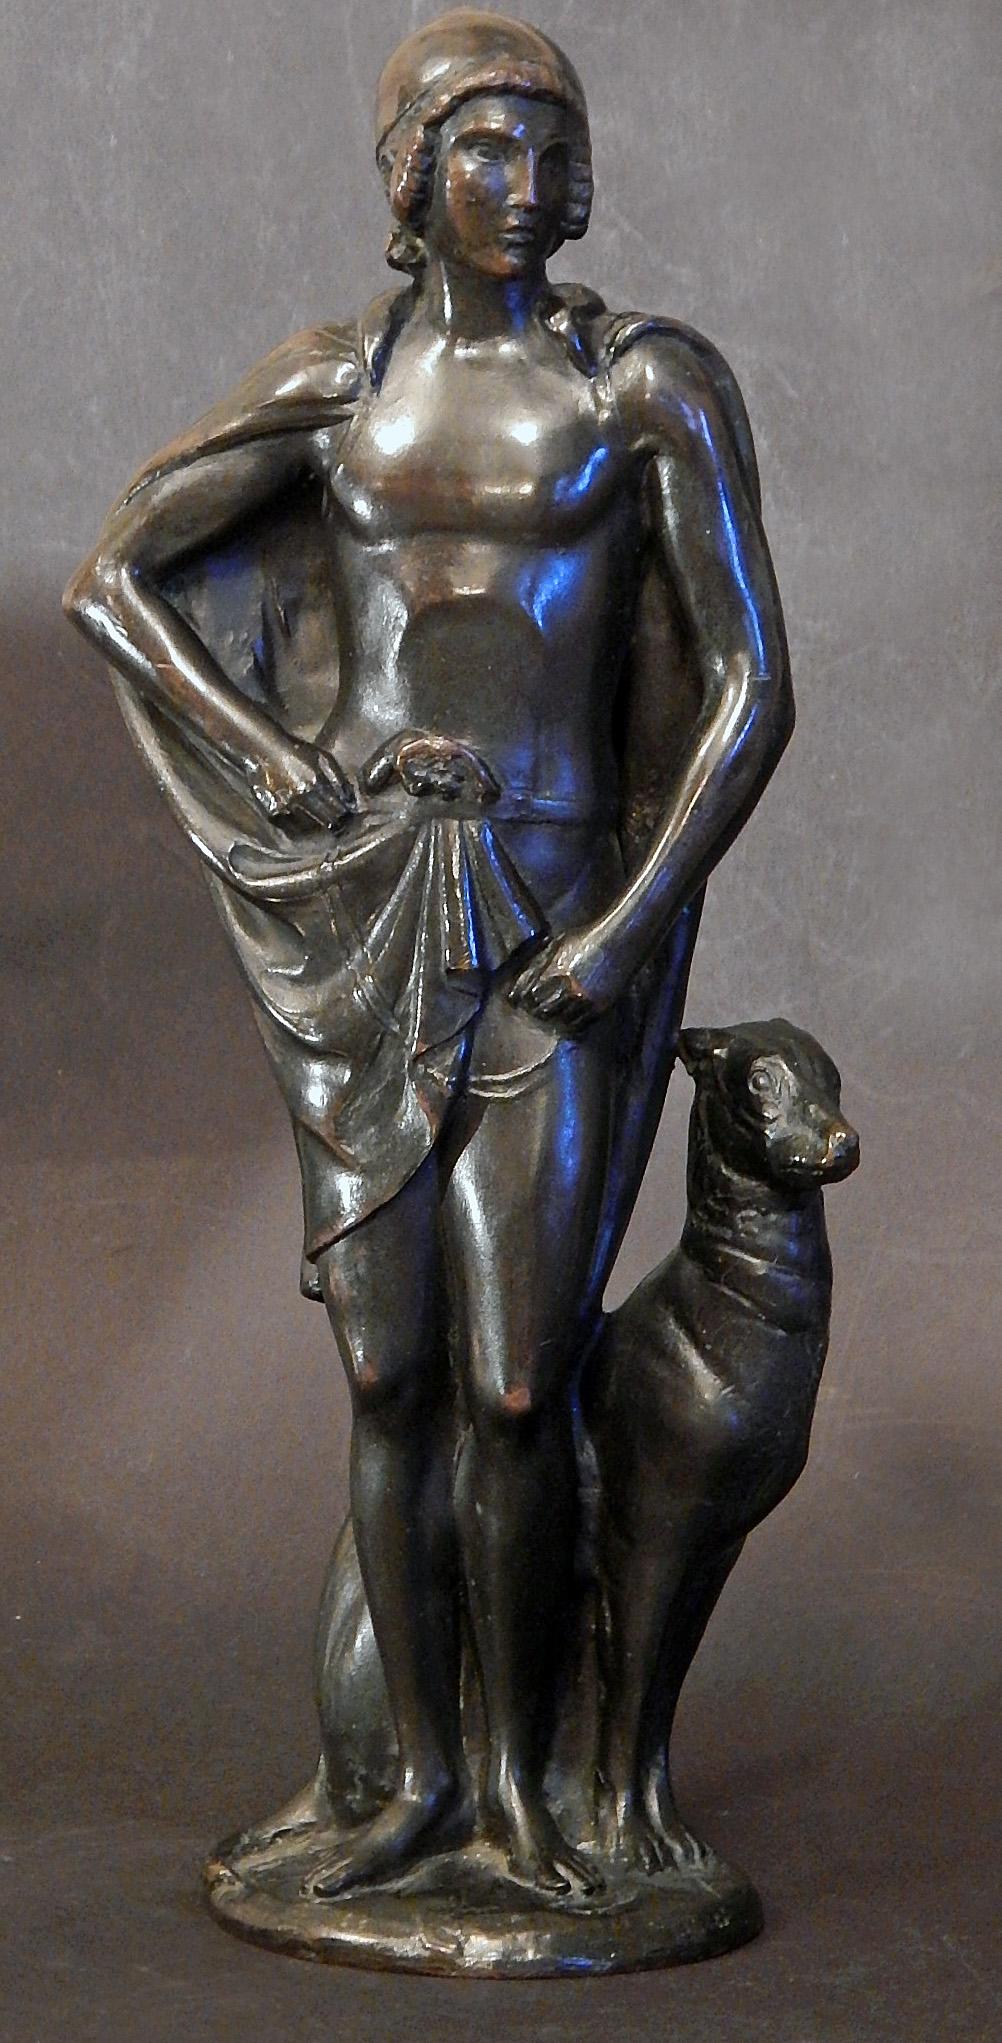 A dignified and poignant bronze by America's greatest sculptor of the 1910s, 1920s and 1930s, this unique piece by Paul Manship depicts young David in ancient Israel, with cape and Classical cap, standing in watchfulness near his flock of sheep.